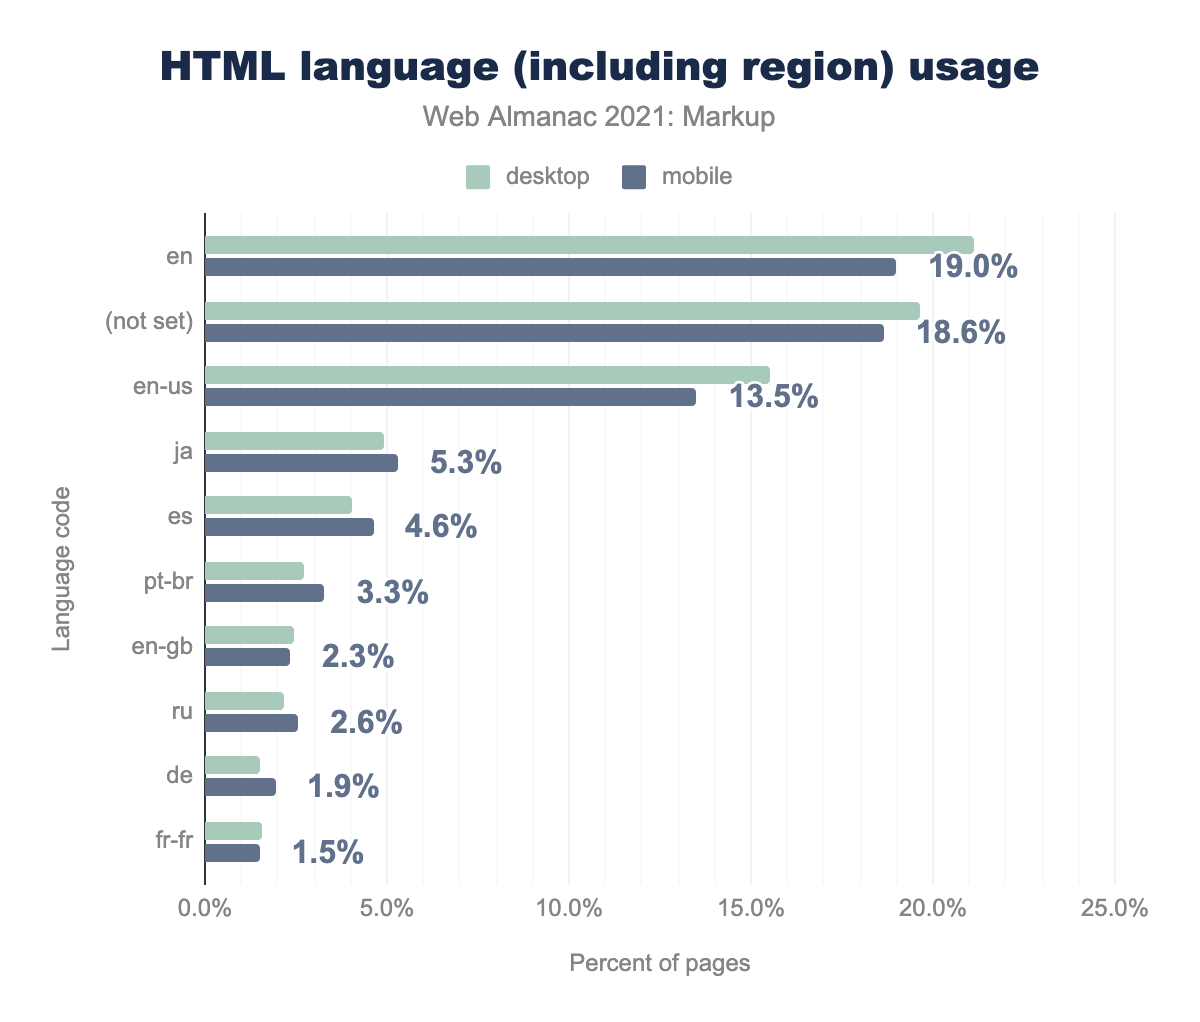 Adoption of the most popular HTML language codes, including region.